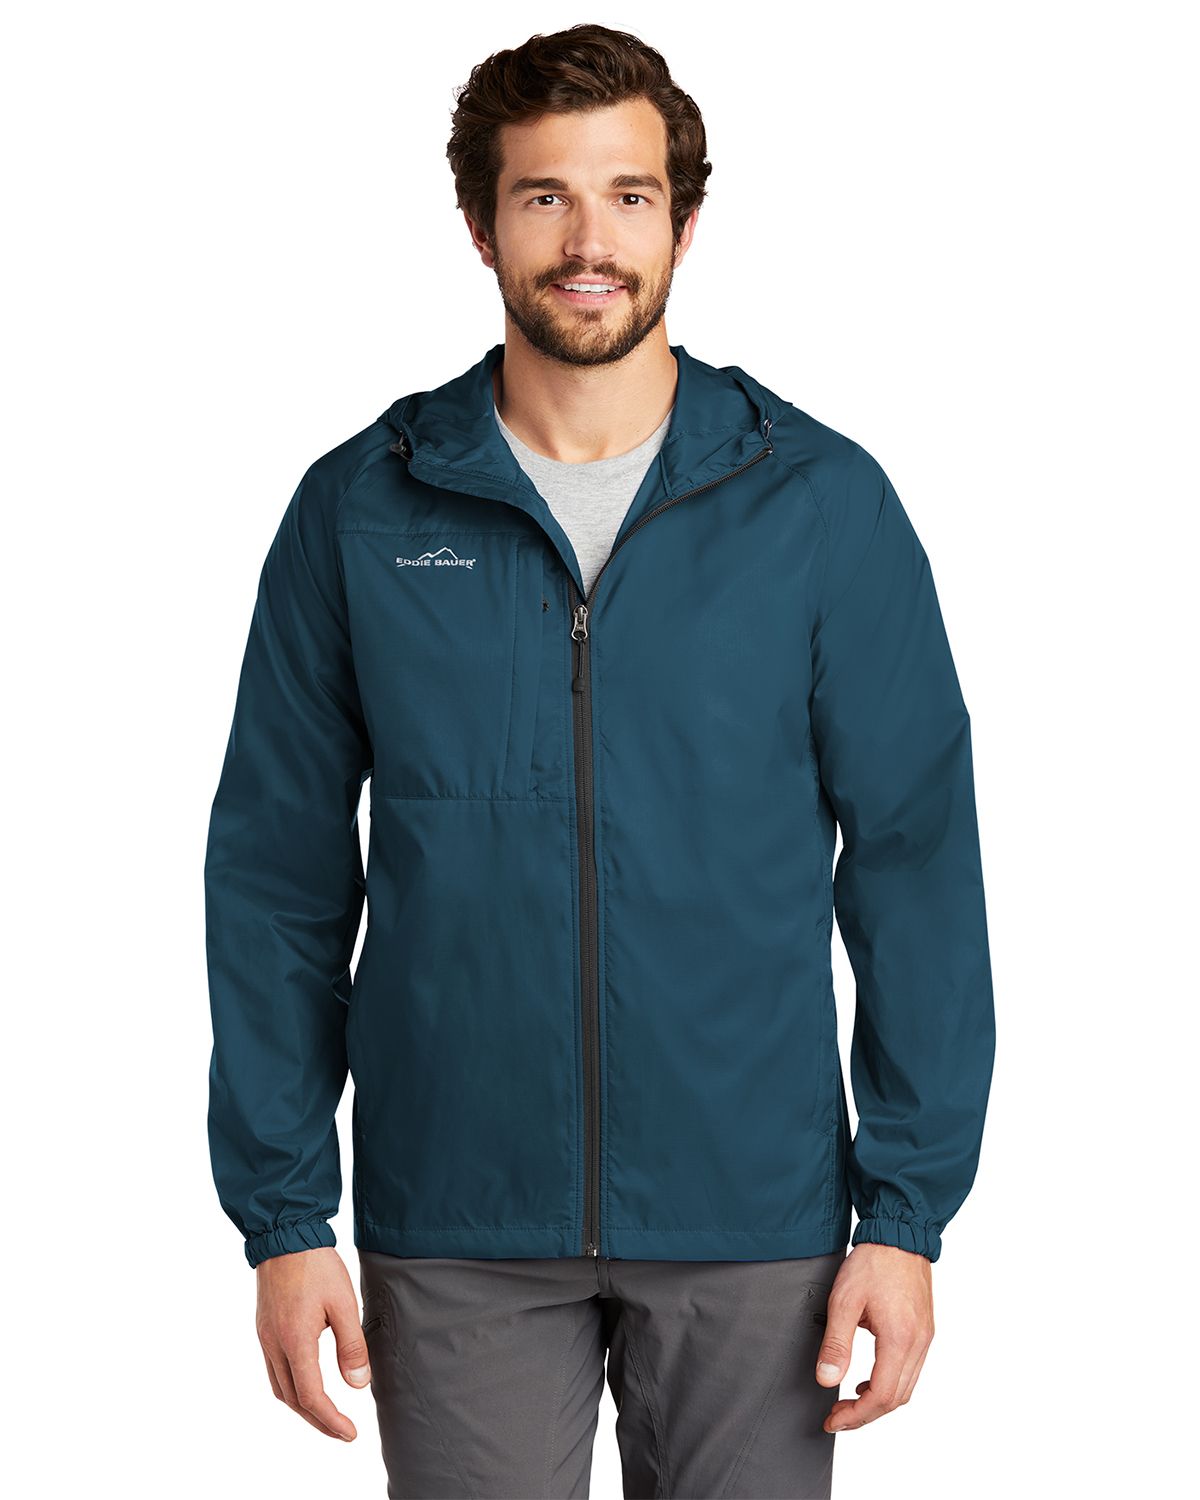 Eddie Bauer Logo Embroidered Packable Wind Jacket at ApparelnBags.com